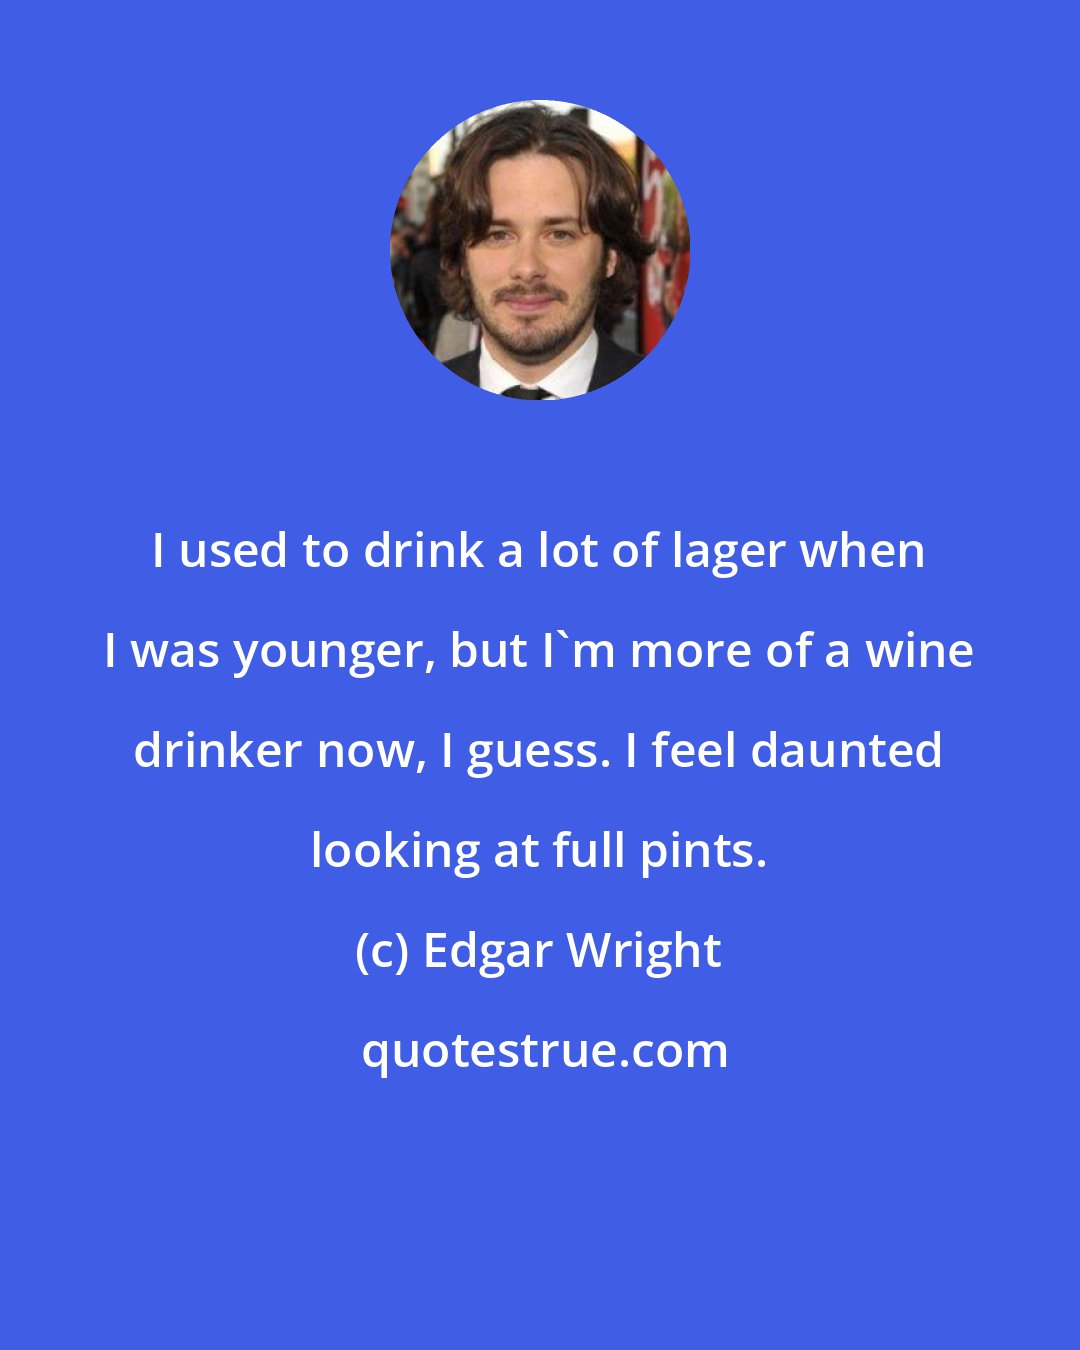 Edgar Wright: I used to drink a lot of lager when I was younger, but I'm more of a wine drinker now, I guess. I feel daunted looking at full pints.